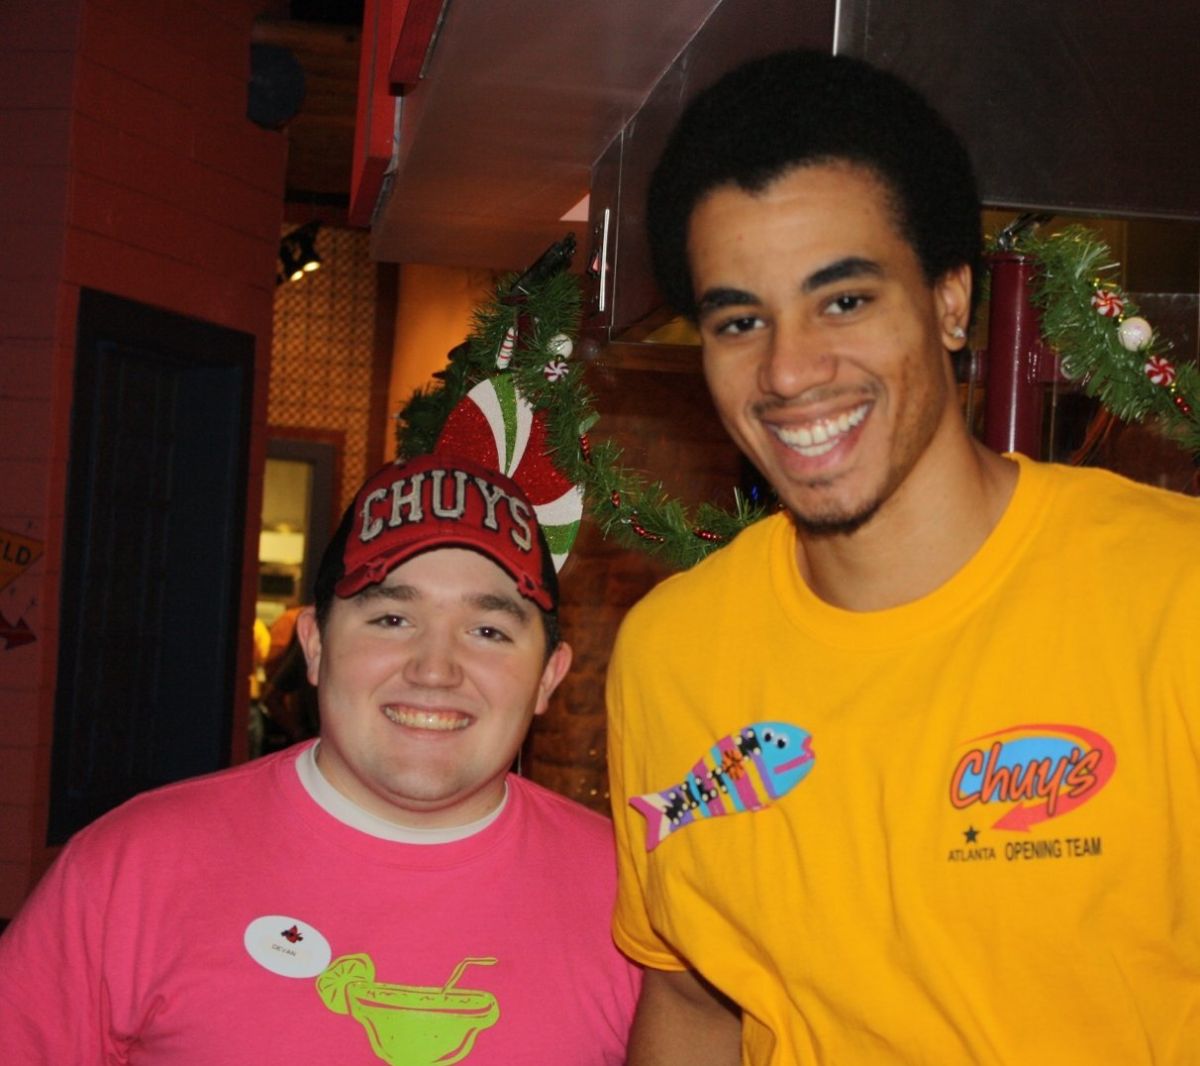 Two very happy Chuy’s employees standing in front of some Christmas decorations